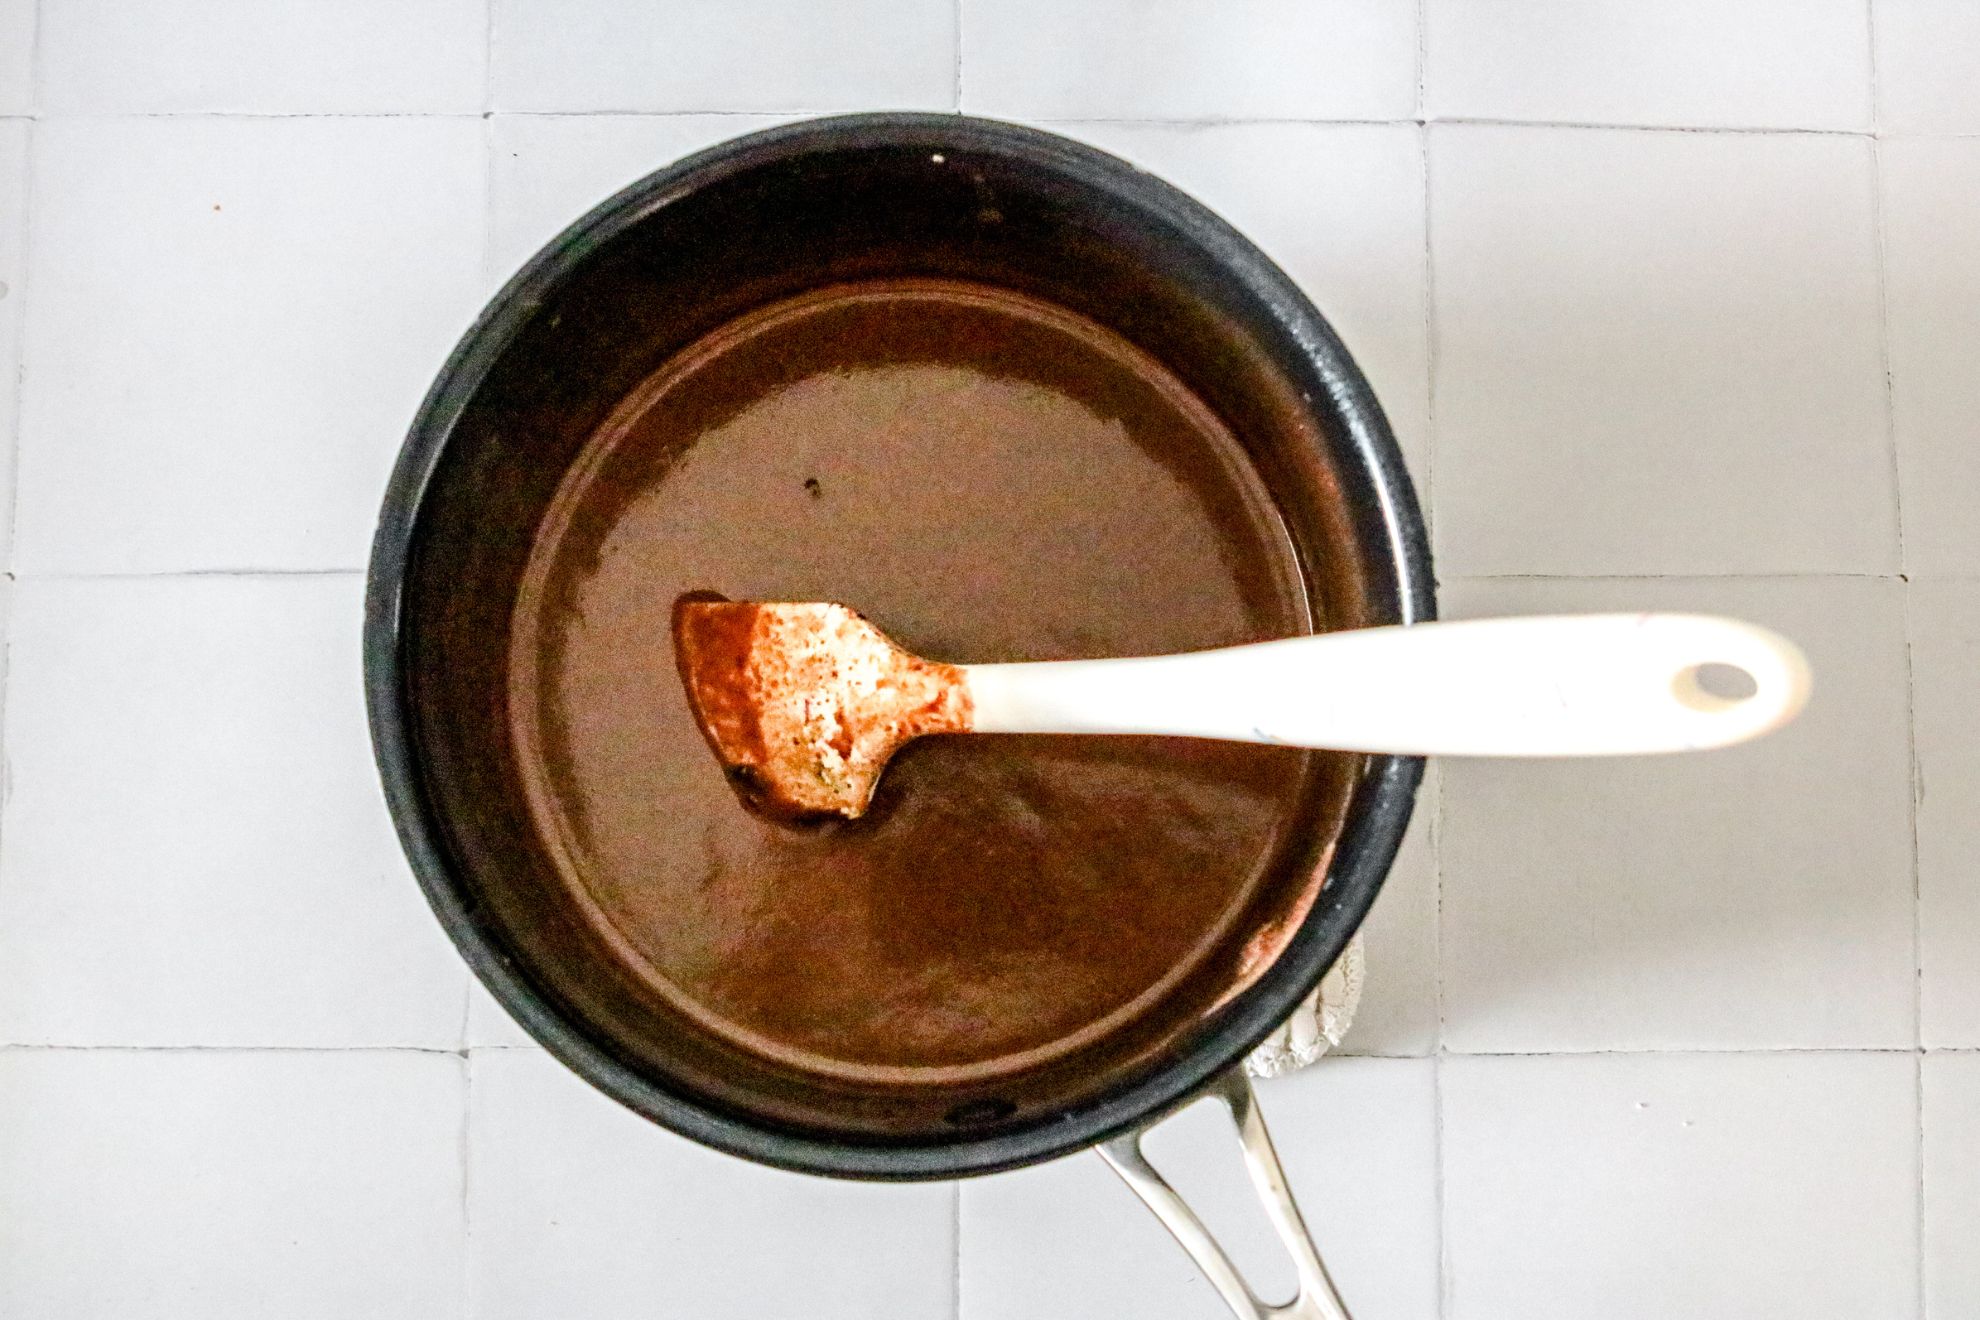 This is an overhead horizontal image of a black and silver pot with a chocolate mixture in it. The pot sits on a white square tile surface. A white spatula is in the pot with the handle leaning against the side of the pot and pointing to the middle right side of the image.